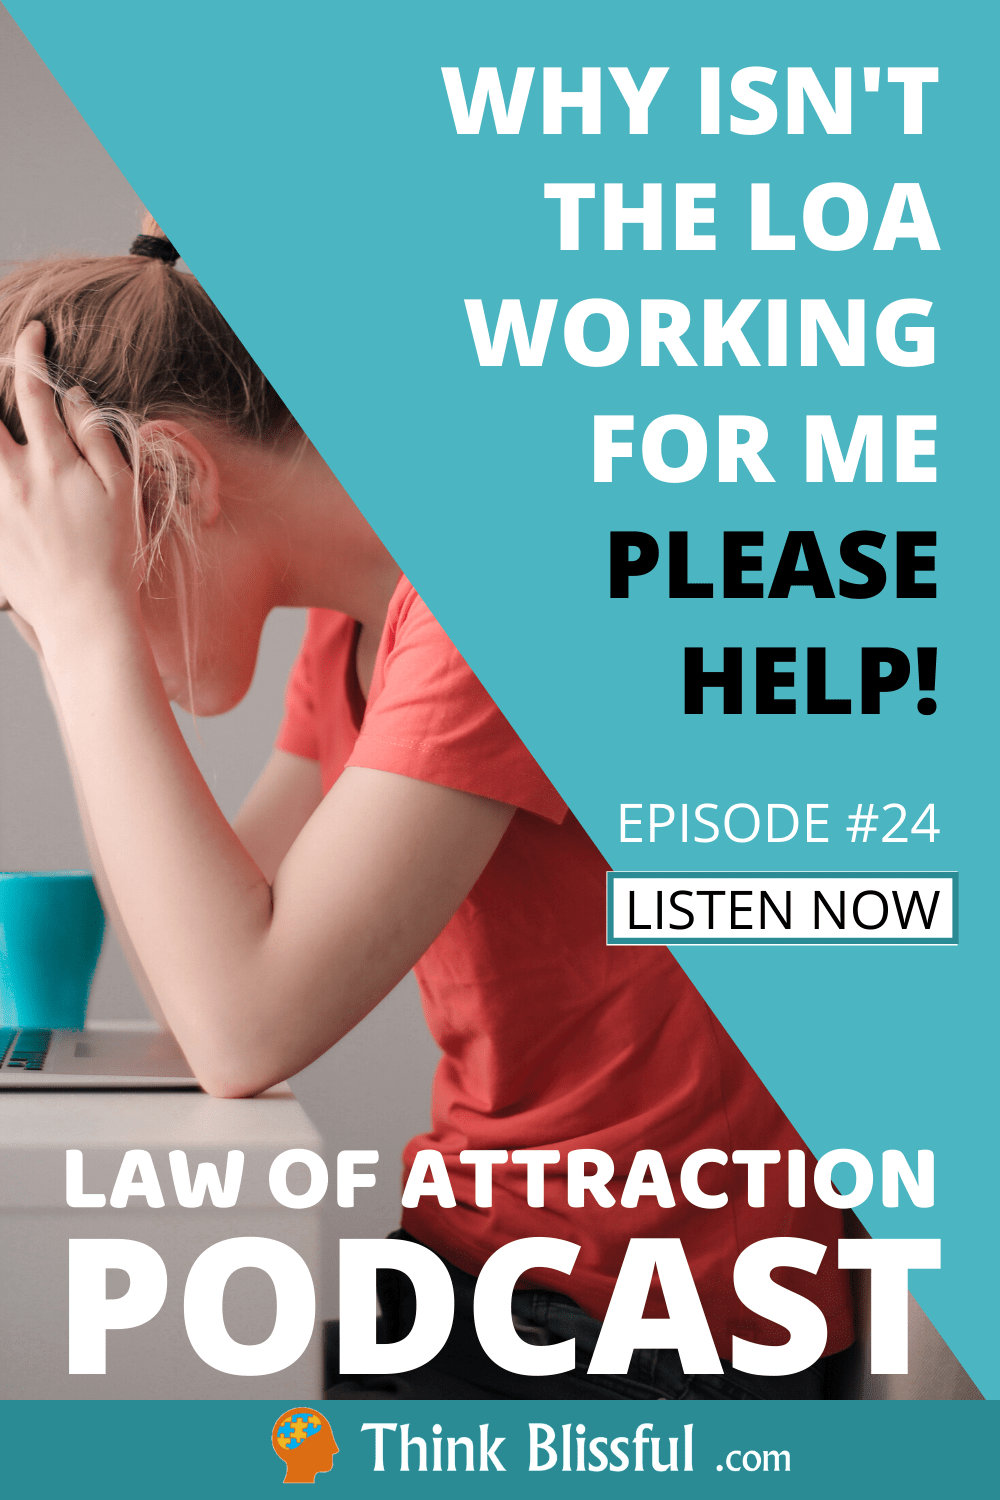 Why isn't the law of attracting working?